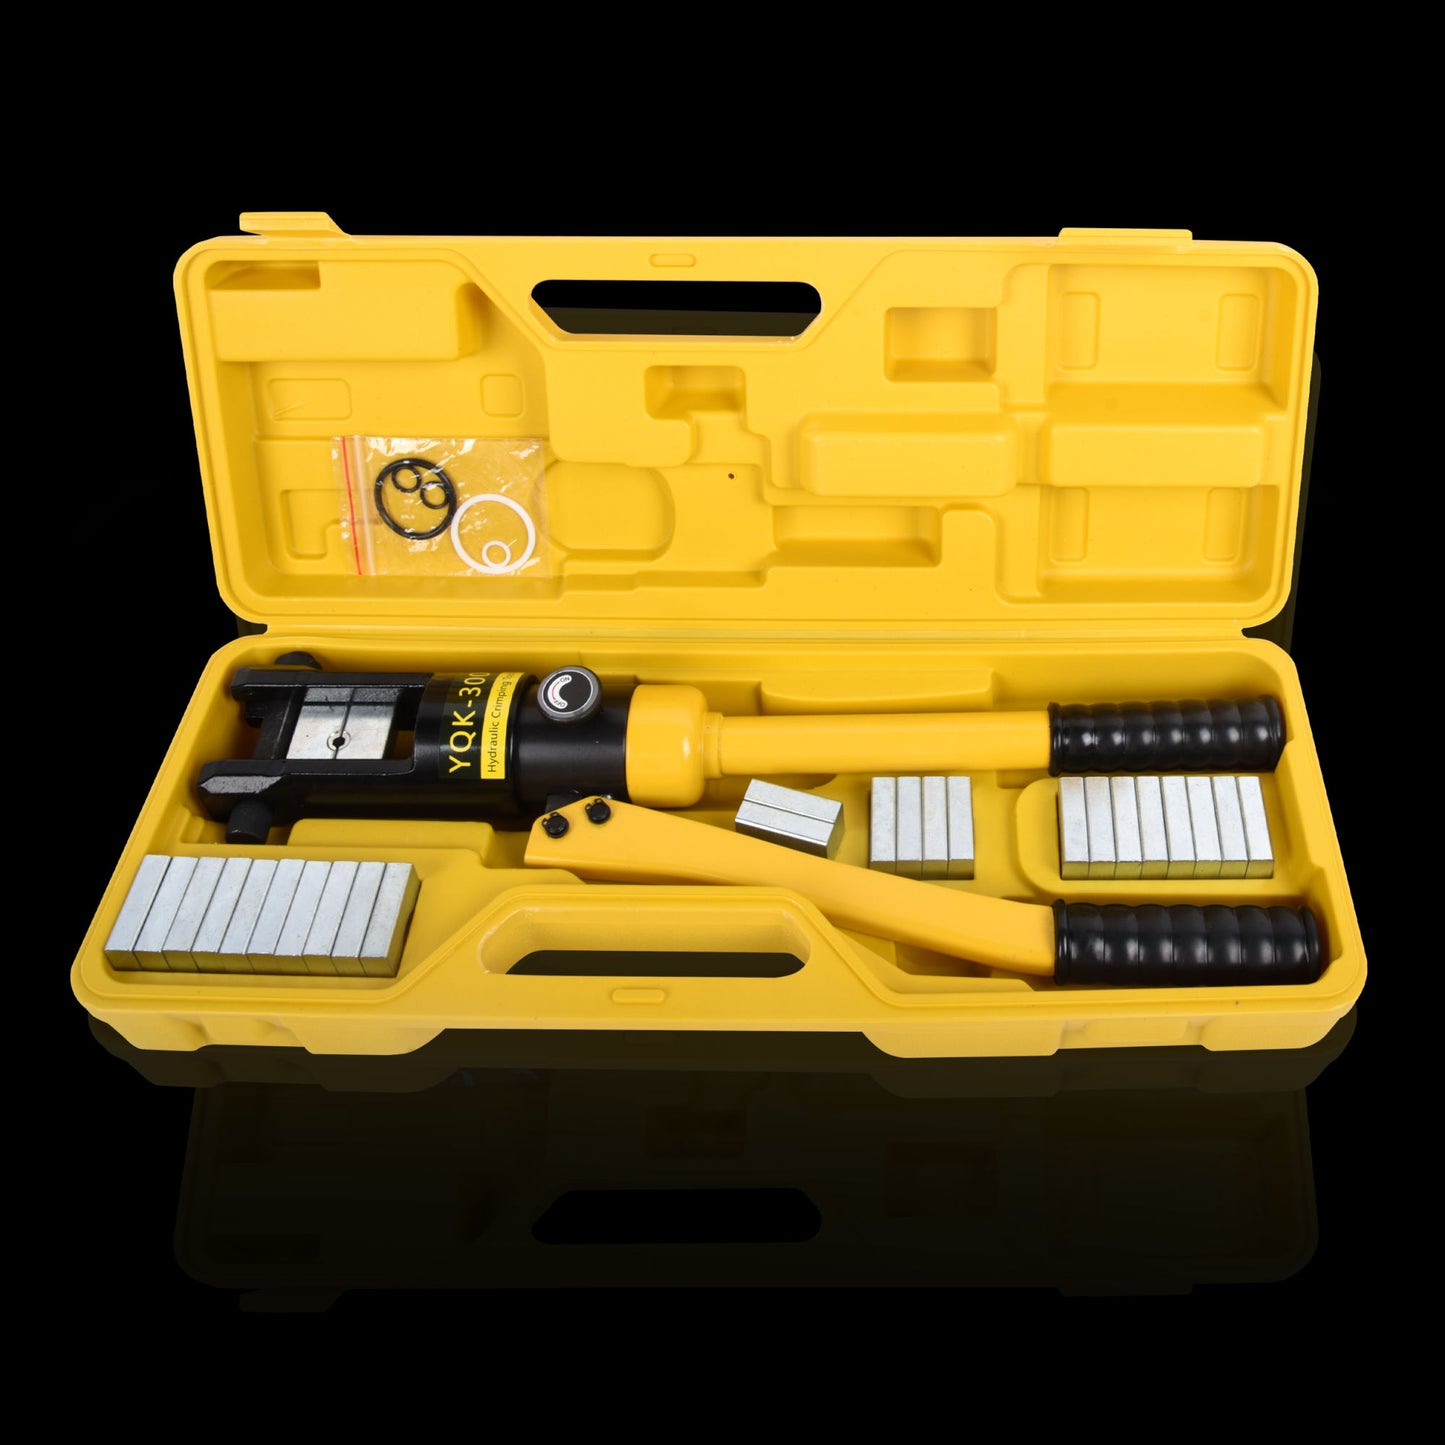 16T Hydraulic Crimping Tool 9 AWG to 600 MCM Battery Cable Crimping Tool 0.87 inch Stroke Hydraulic Lug Crimper Electrical Terminal Crimper with 13 Pairs of Dies